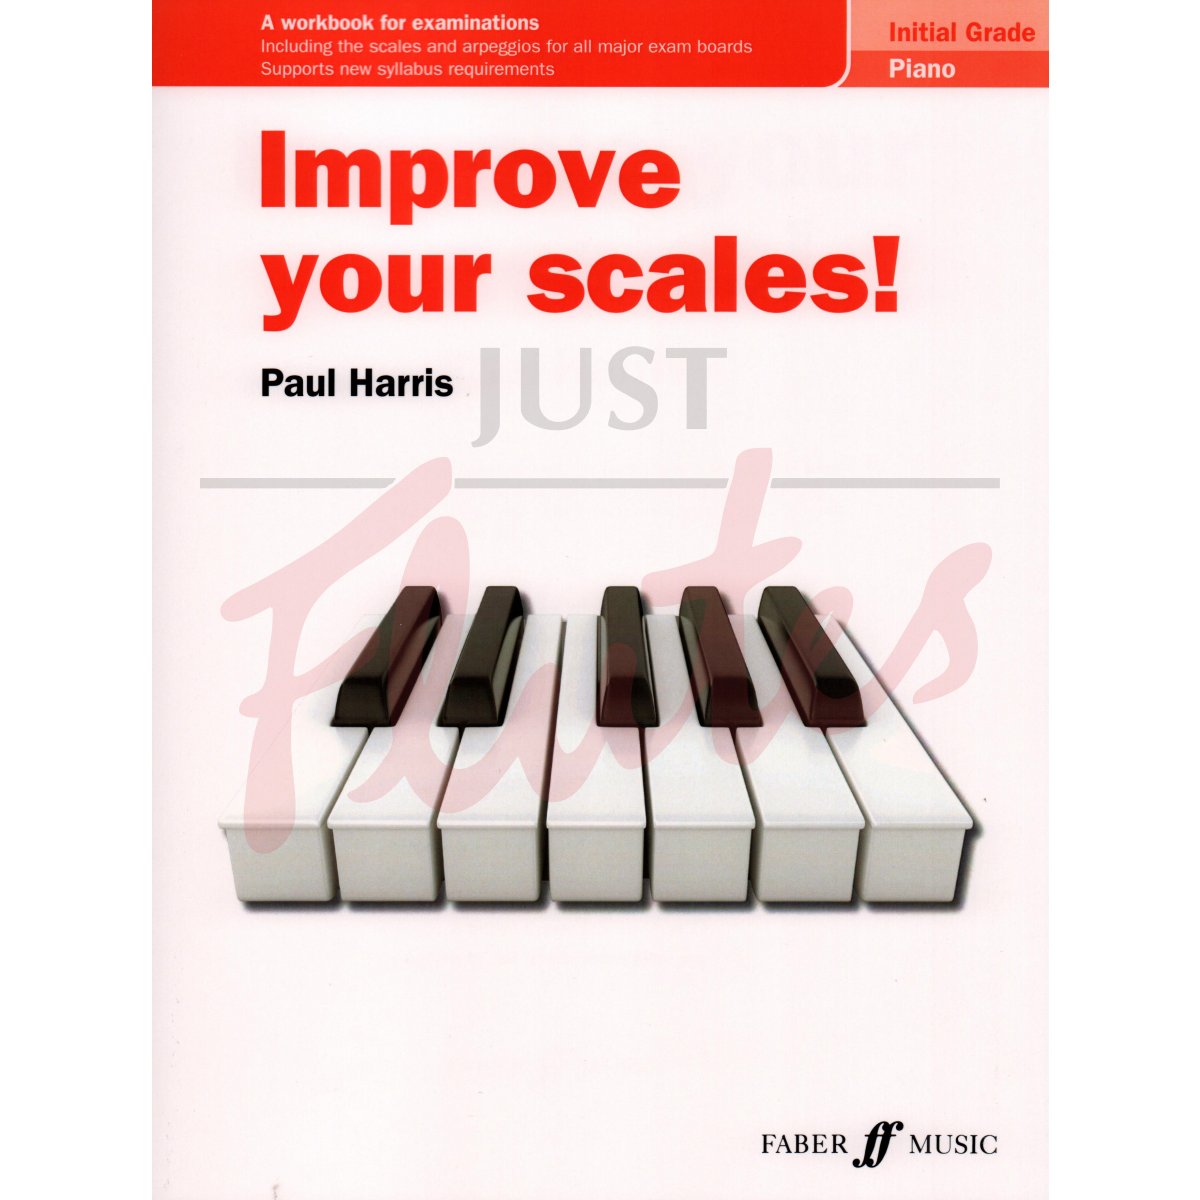 Improve Your Scales! [Piano] Initial Grade